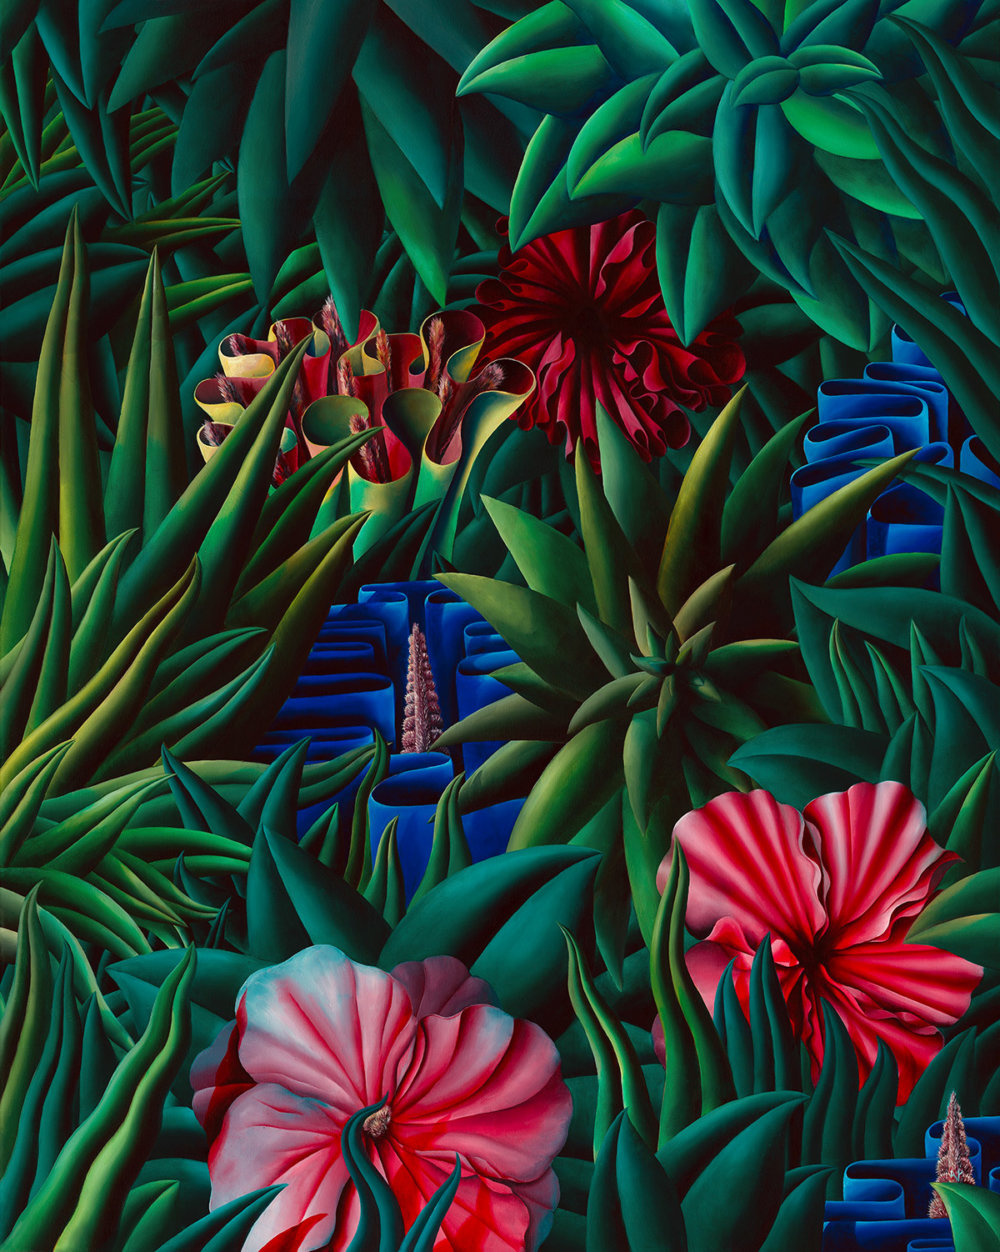 Elegant Chaos Vibrant Surrealist Paintings Of Tropical Fauna And Flora By Anthony Padilla 2